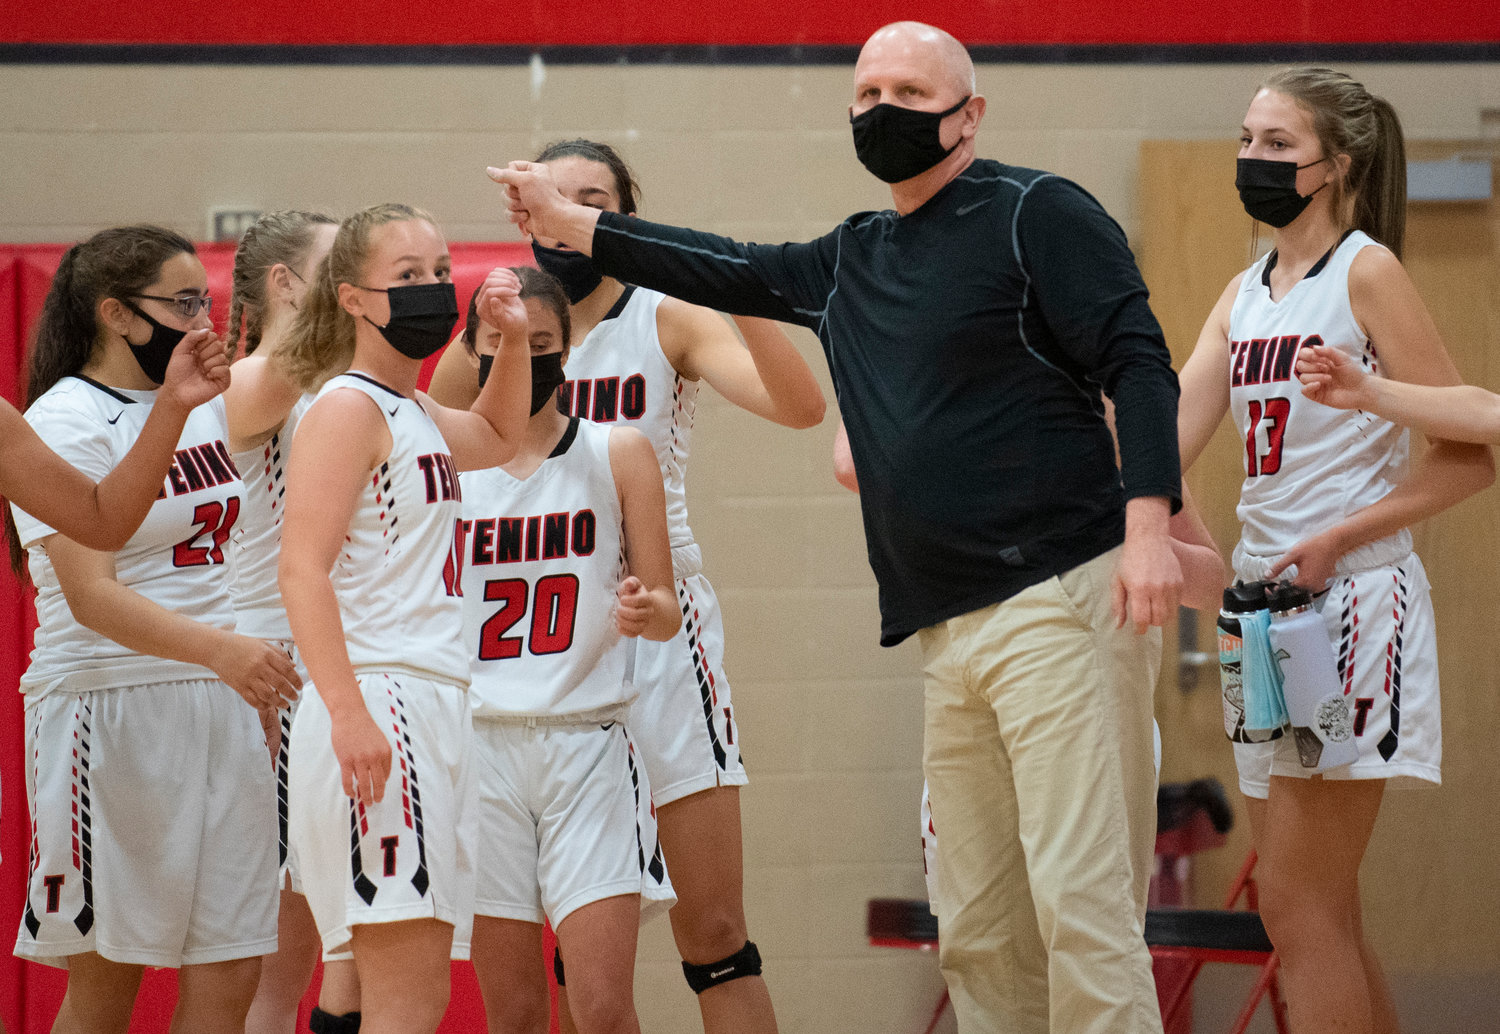 Tenino coach Scott Ashmore and the Beavers break from a timeout during a game against Elma on Saturday.